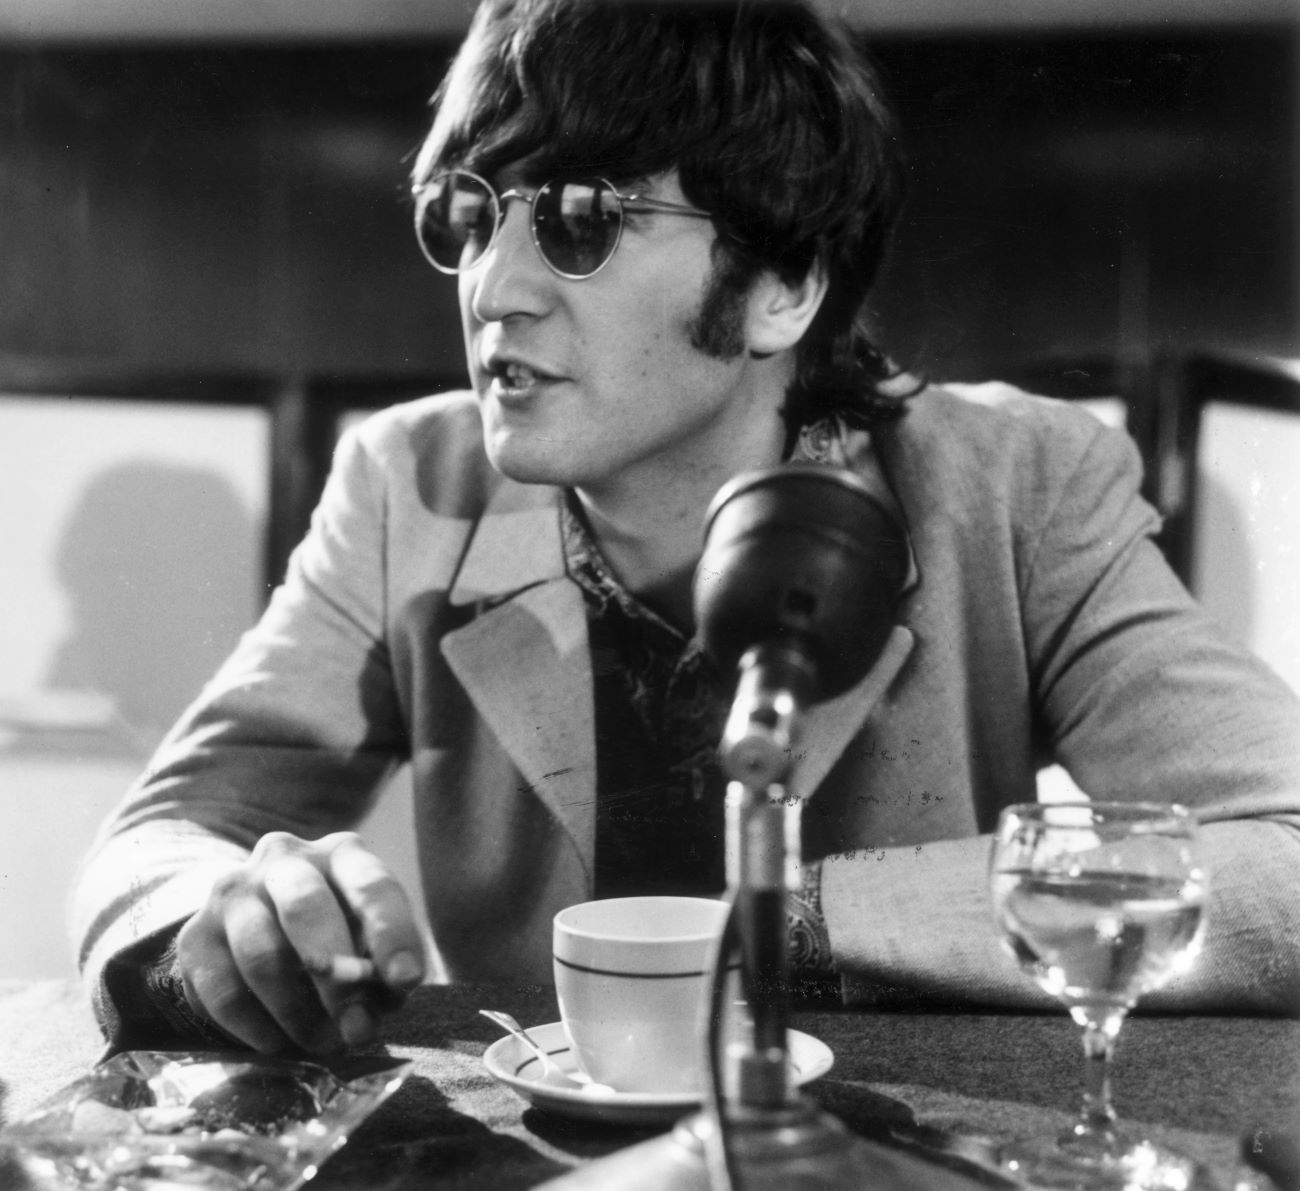 John Lennon wears sunglasses and sits in front of a microphone.